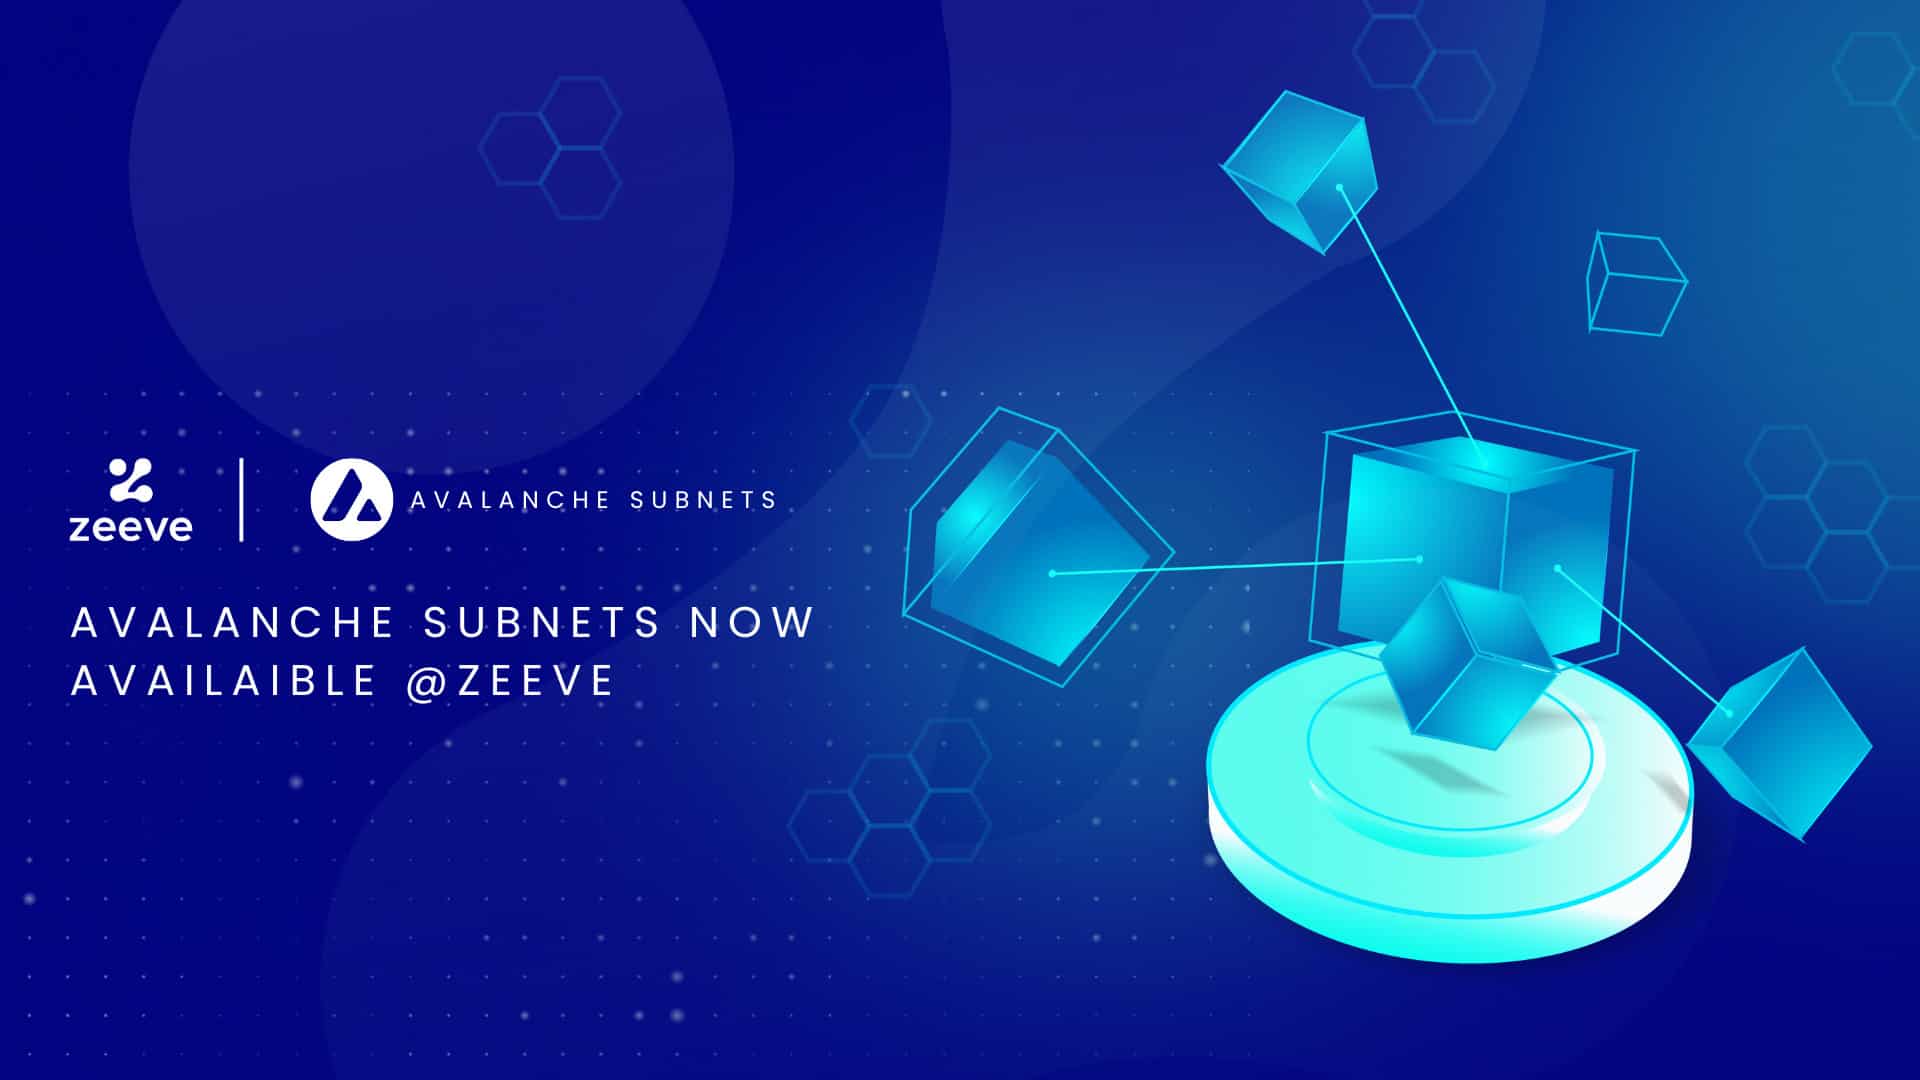 Zeeve-adds-support-for-avalanche-subnets-and-upgrades-its-web3-infrastructure-stack